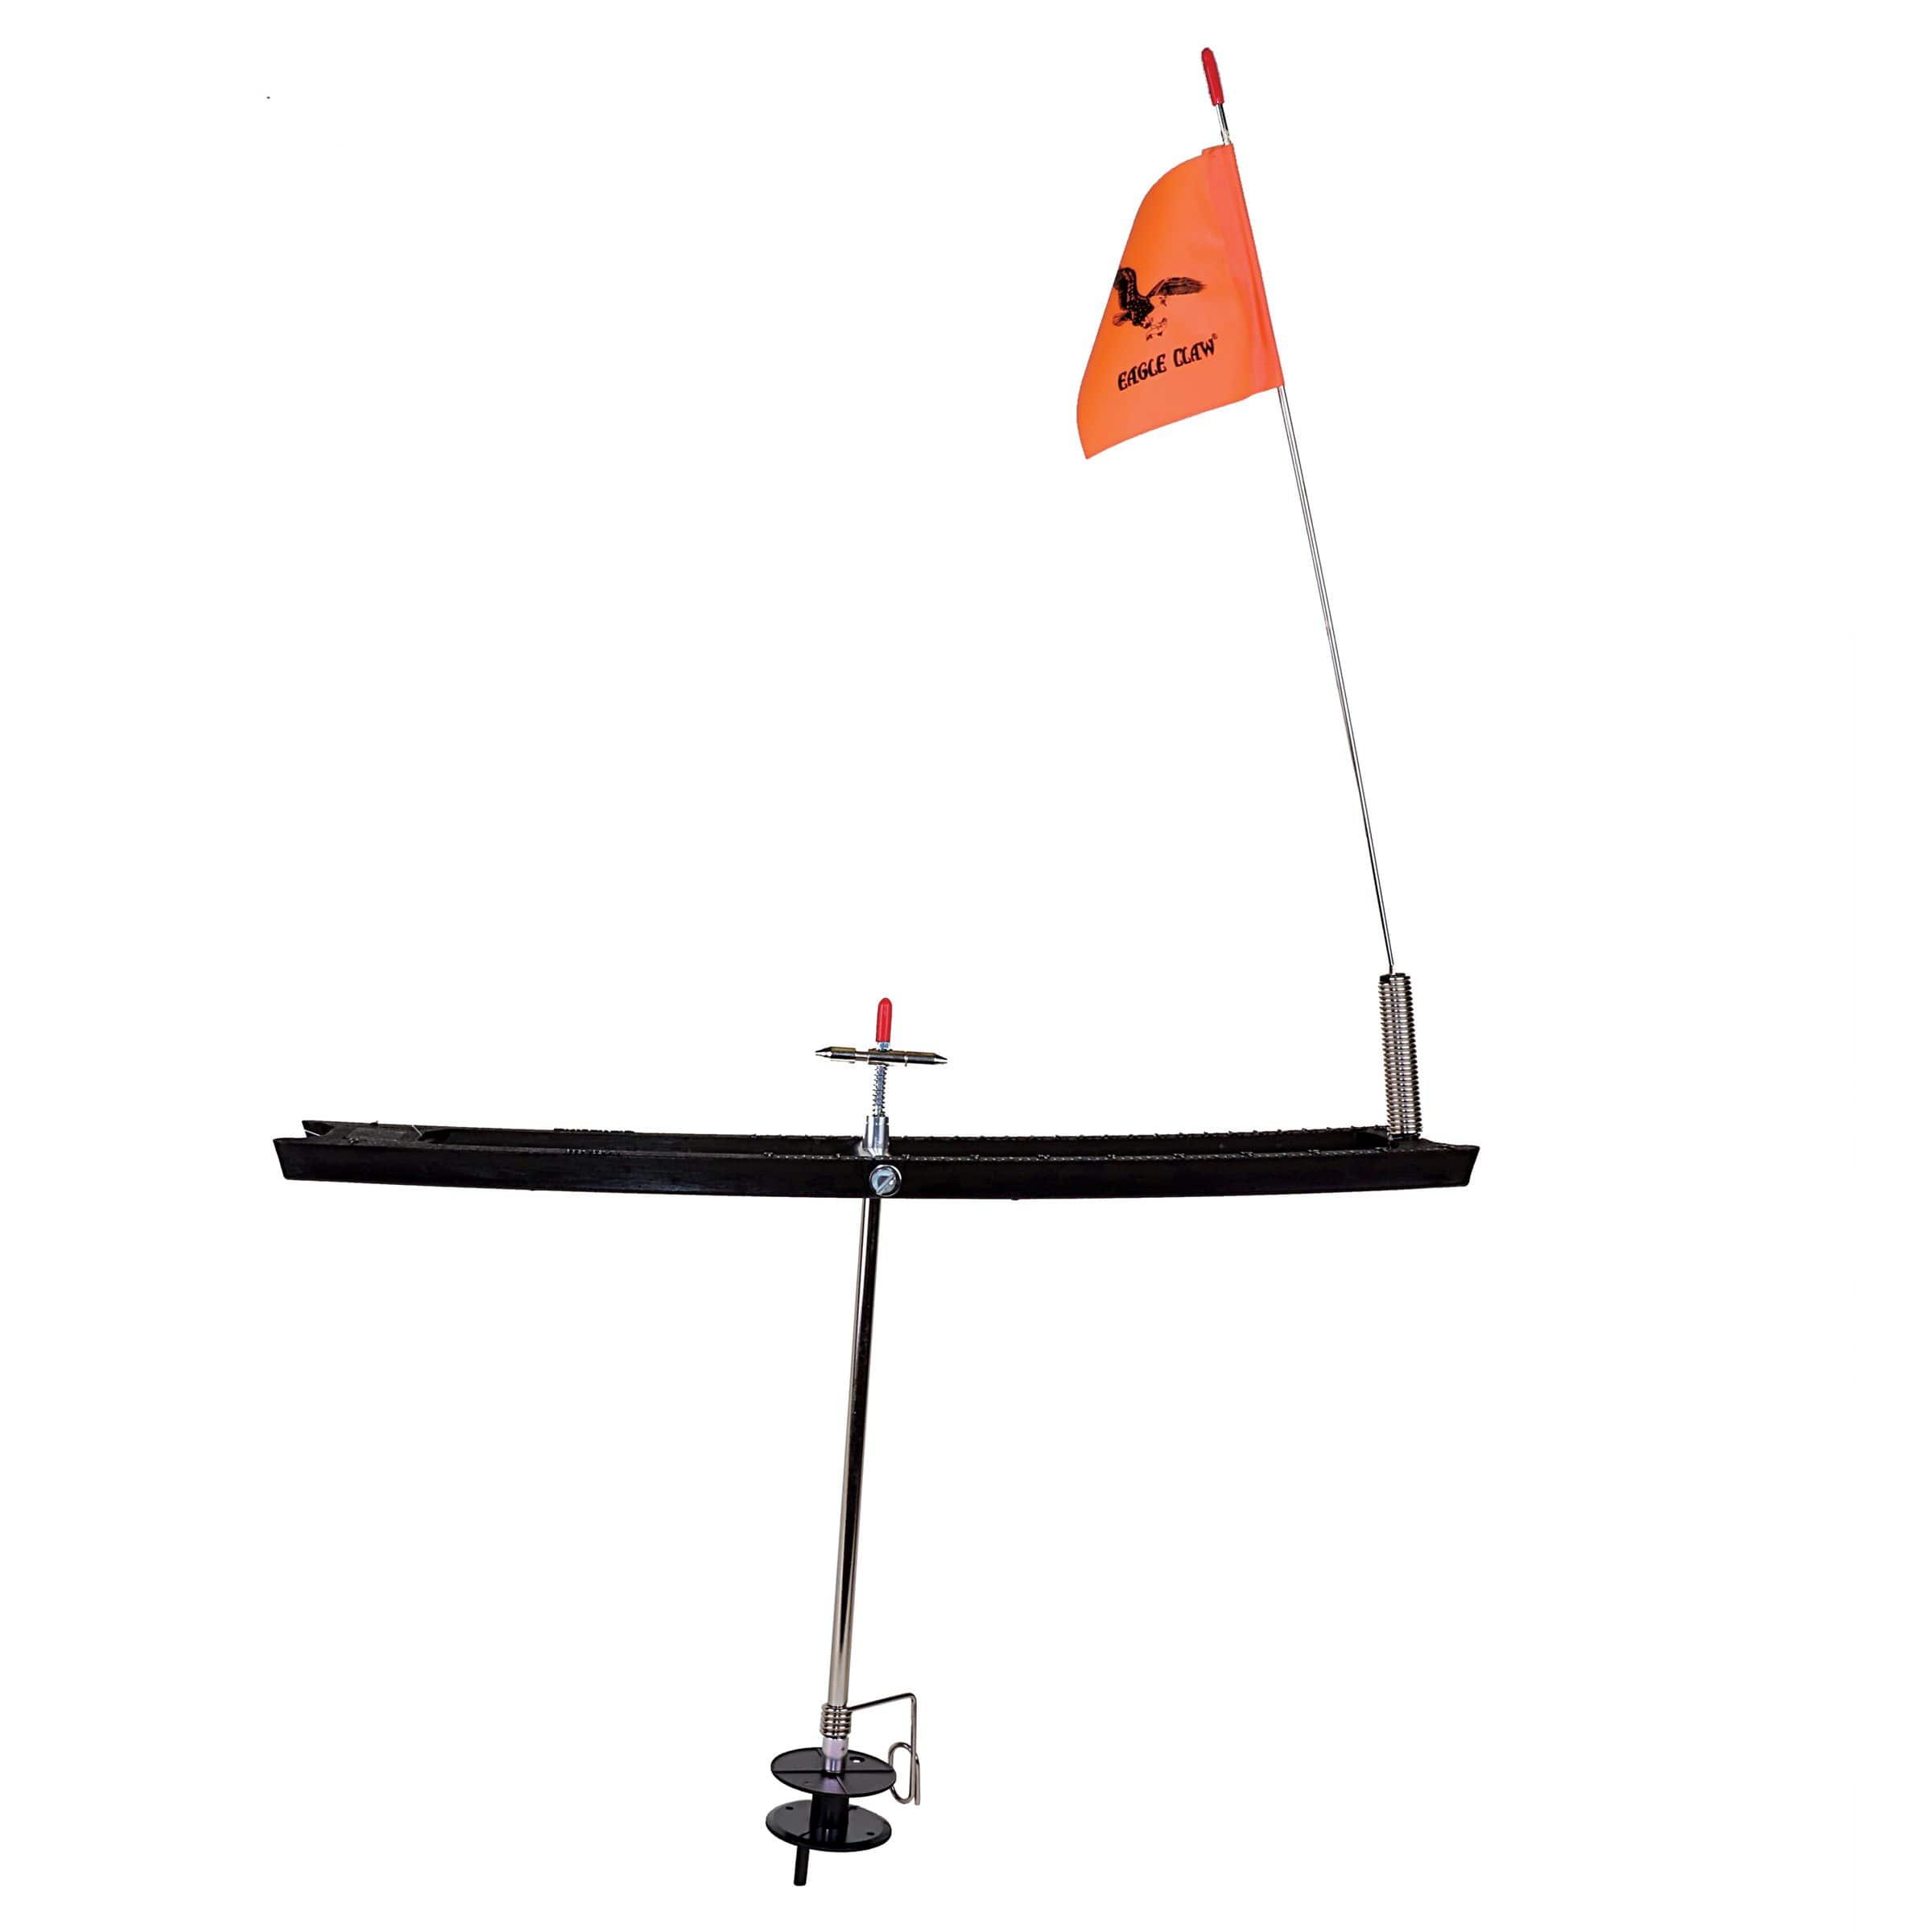 https://media-www.canadiantire.ca/product/playing/fishing/ice-fishing/0774558/eagle-claw-arctic-tip-up-632b9b36-b4af-44e2-b384-019d755ca1ff-jpgrendition.jpg